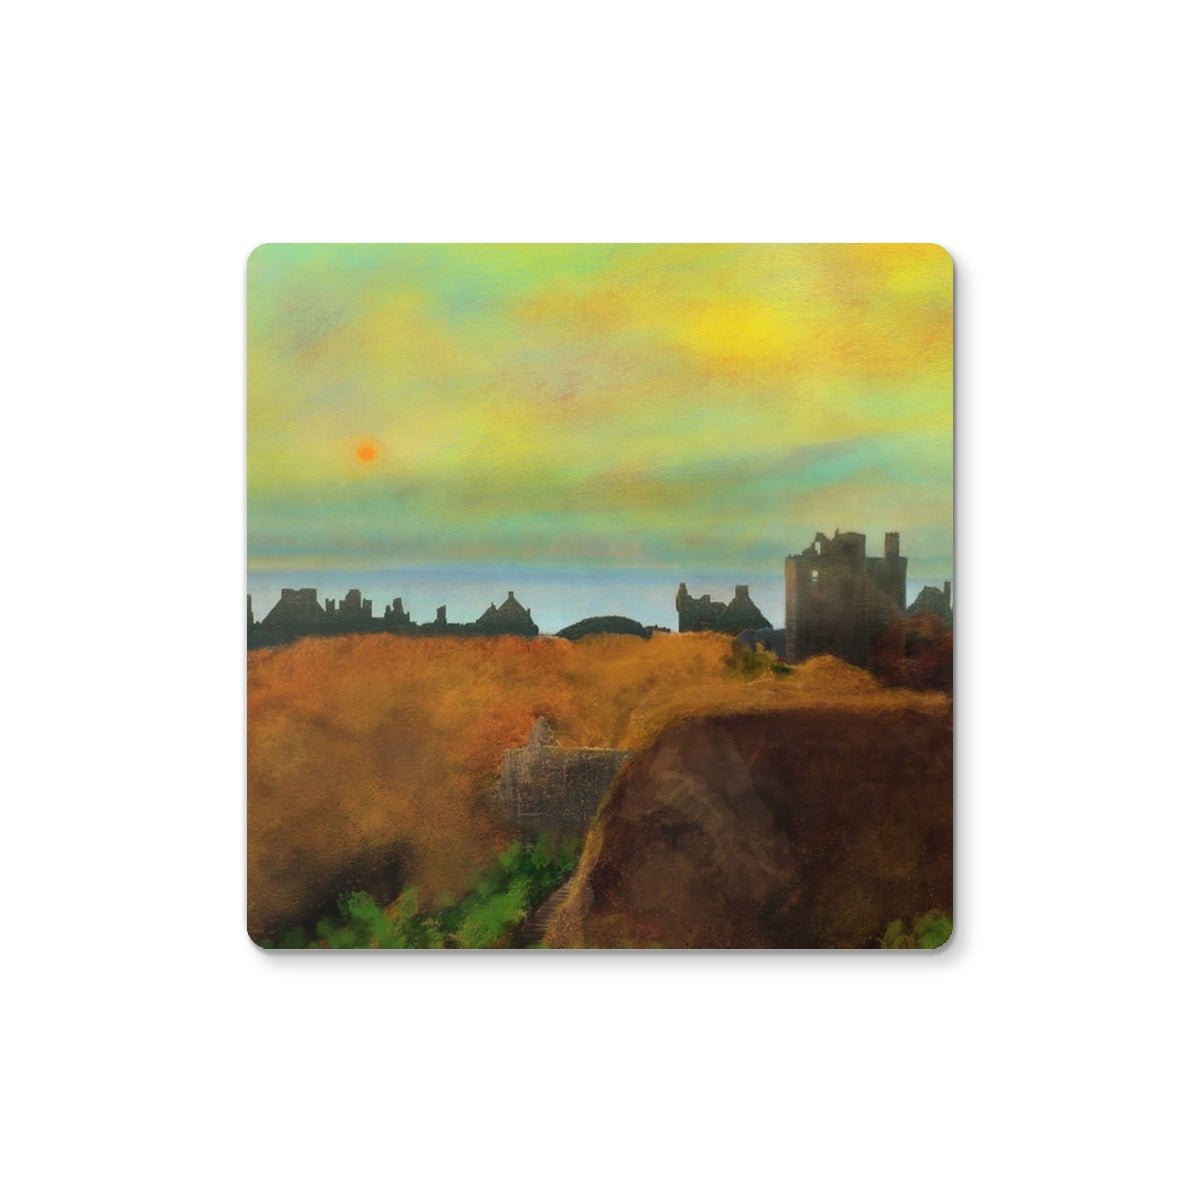 Dunnottar Castle Dusk Art Gifts Coaster-Coasters-Historic & Iconic Scotland Art Gallery-2 Coasters-Paintings, Prints, Homeware, Art Gifts From Scotland By Scottish Artist Kevin Hunter